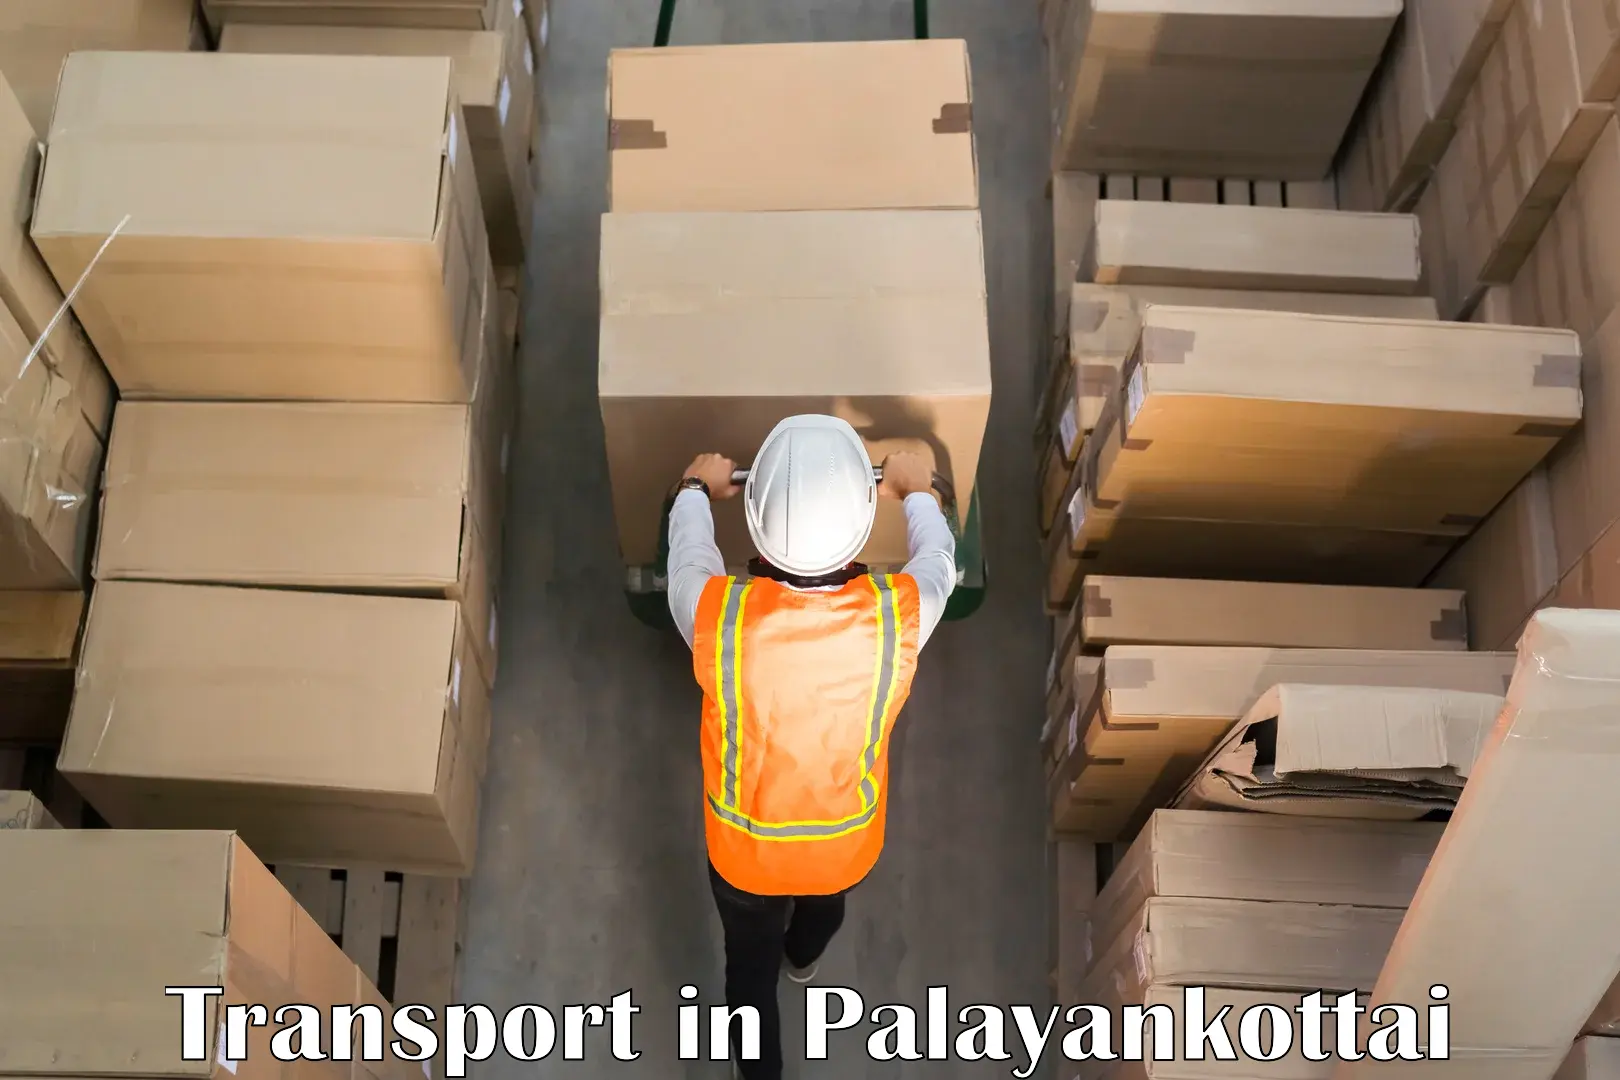 Commercial transport service in Palayankottai